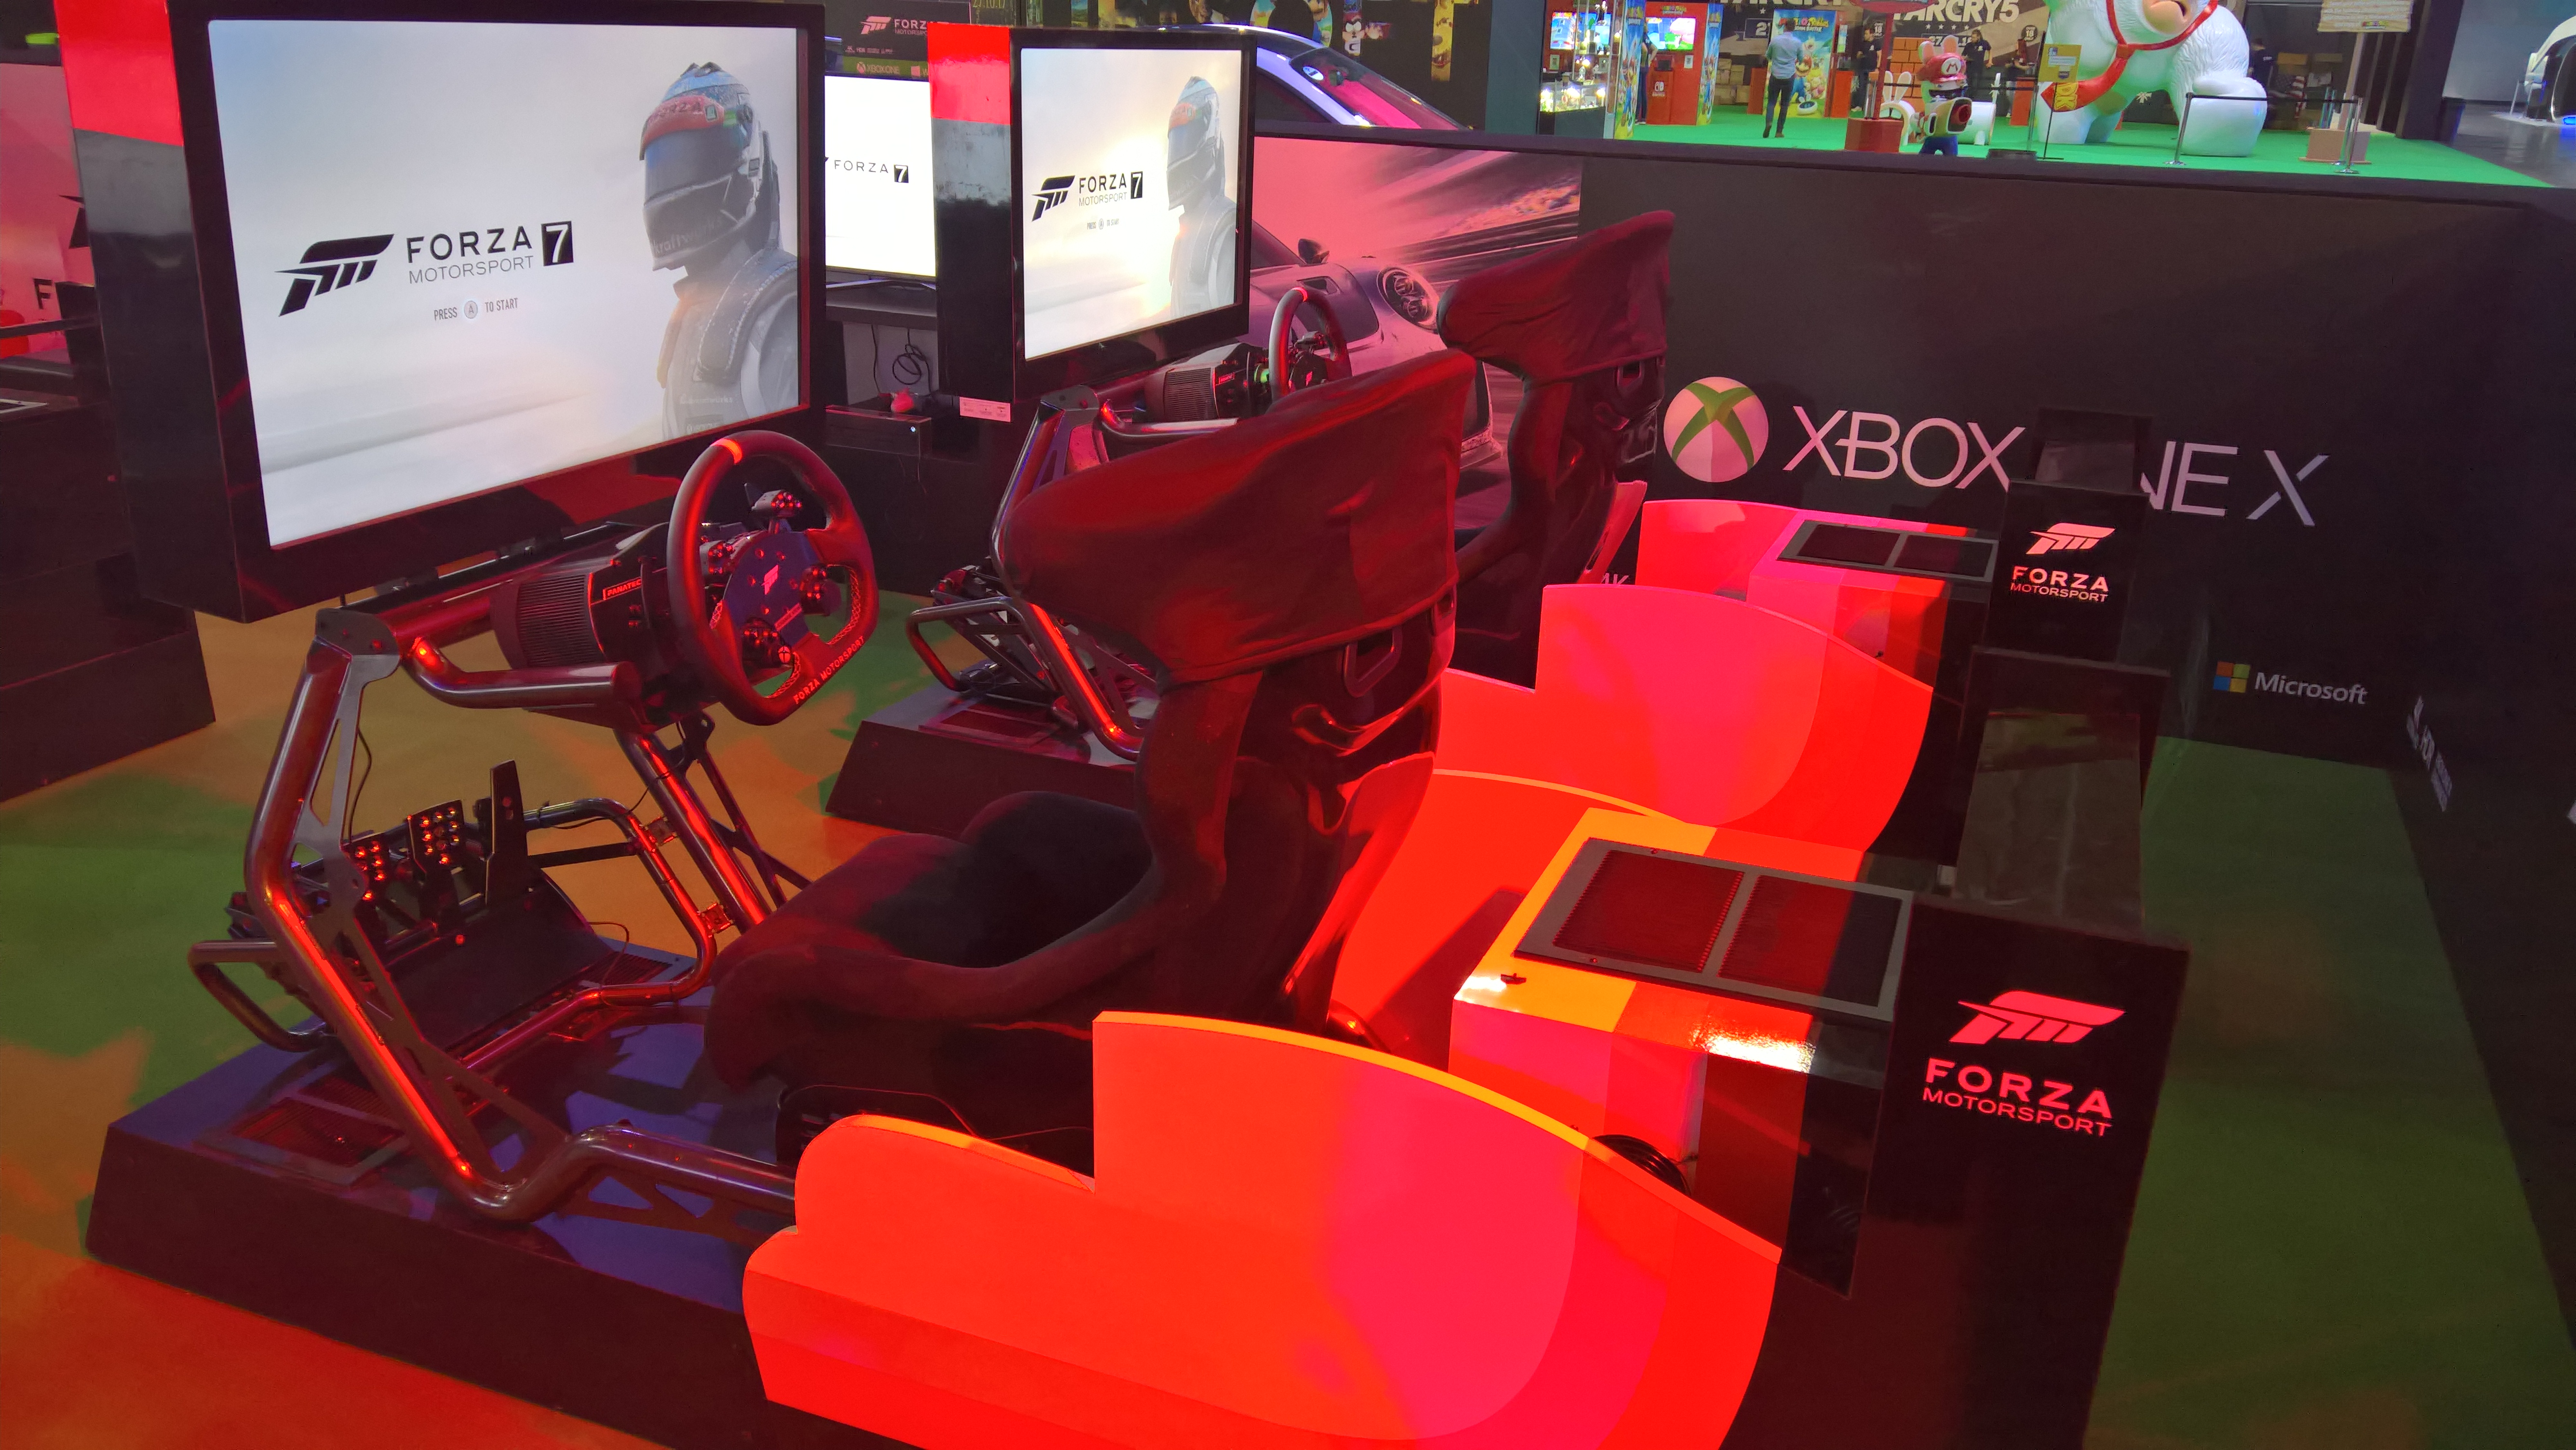 Forza fans could race in special driving rigs